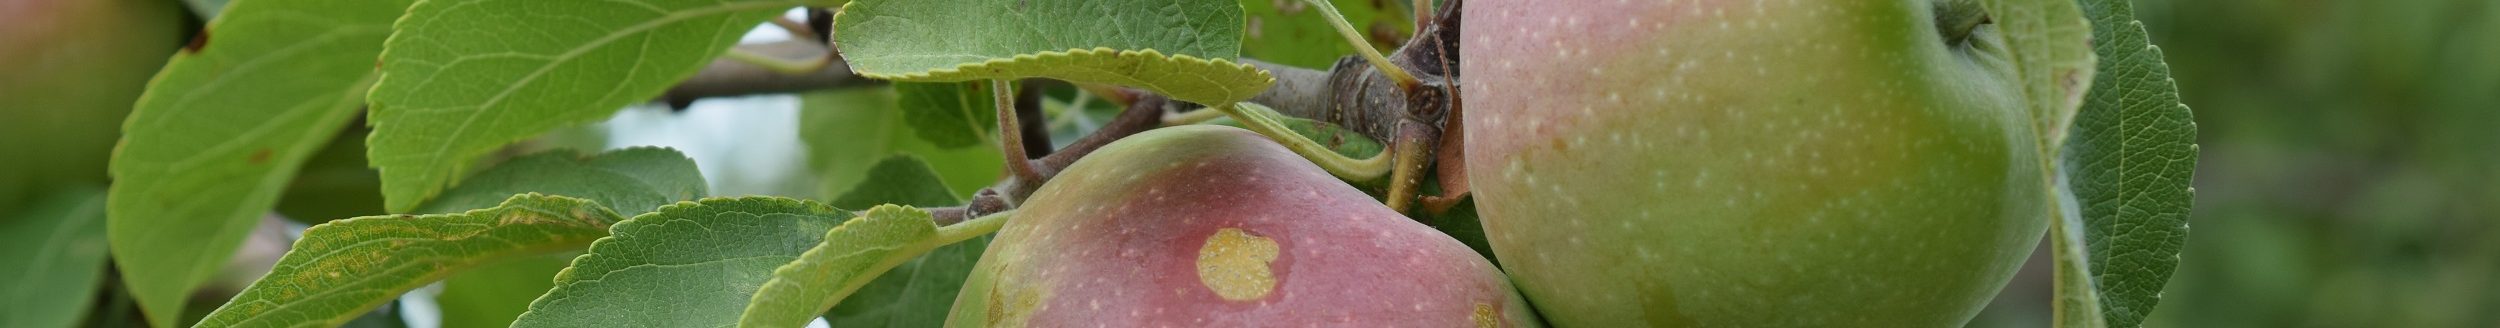 Apples growing on a tree. (Photo courtesy of Iowa State University Extension and Outreach.)